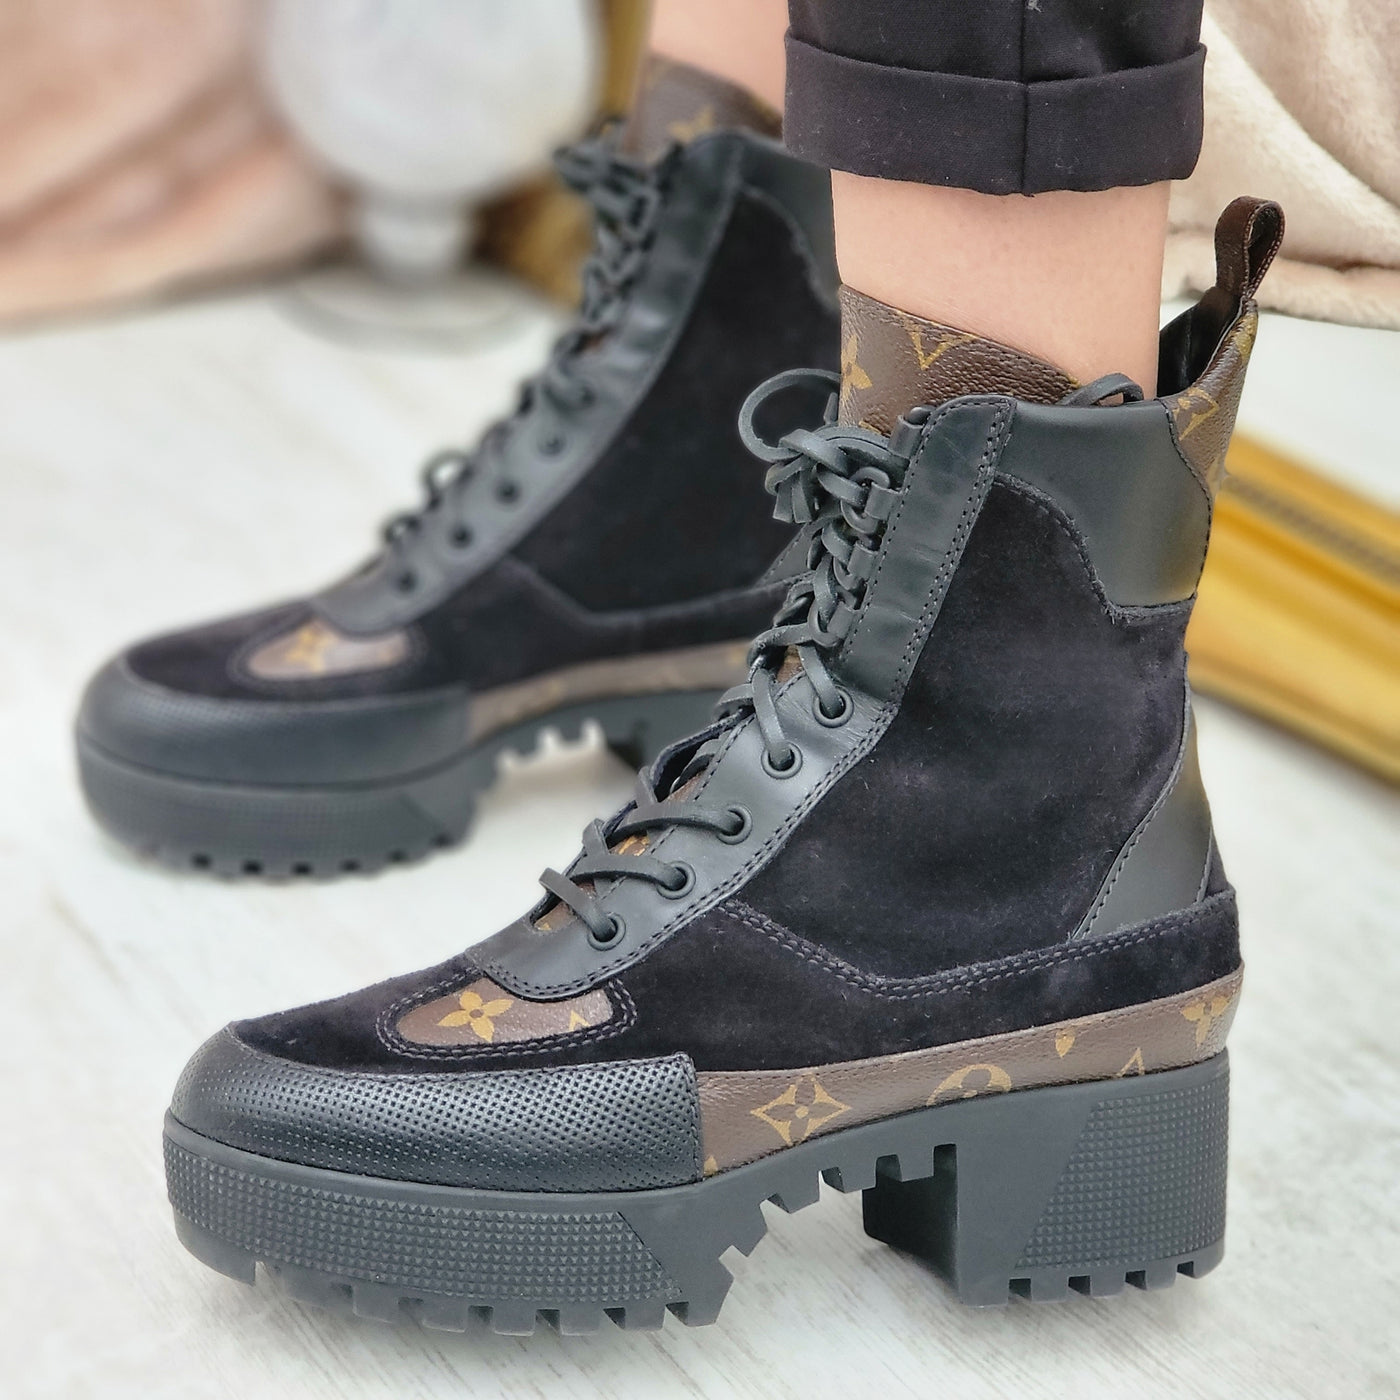 Louis Vuitton Pillow Boots Are The Puffer Shoes All Over Instagram   Glamour UK